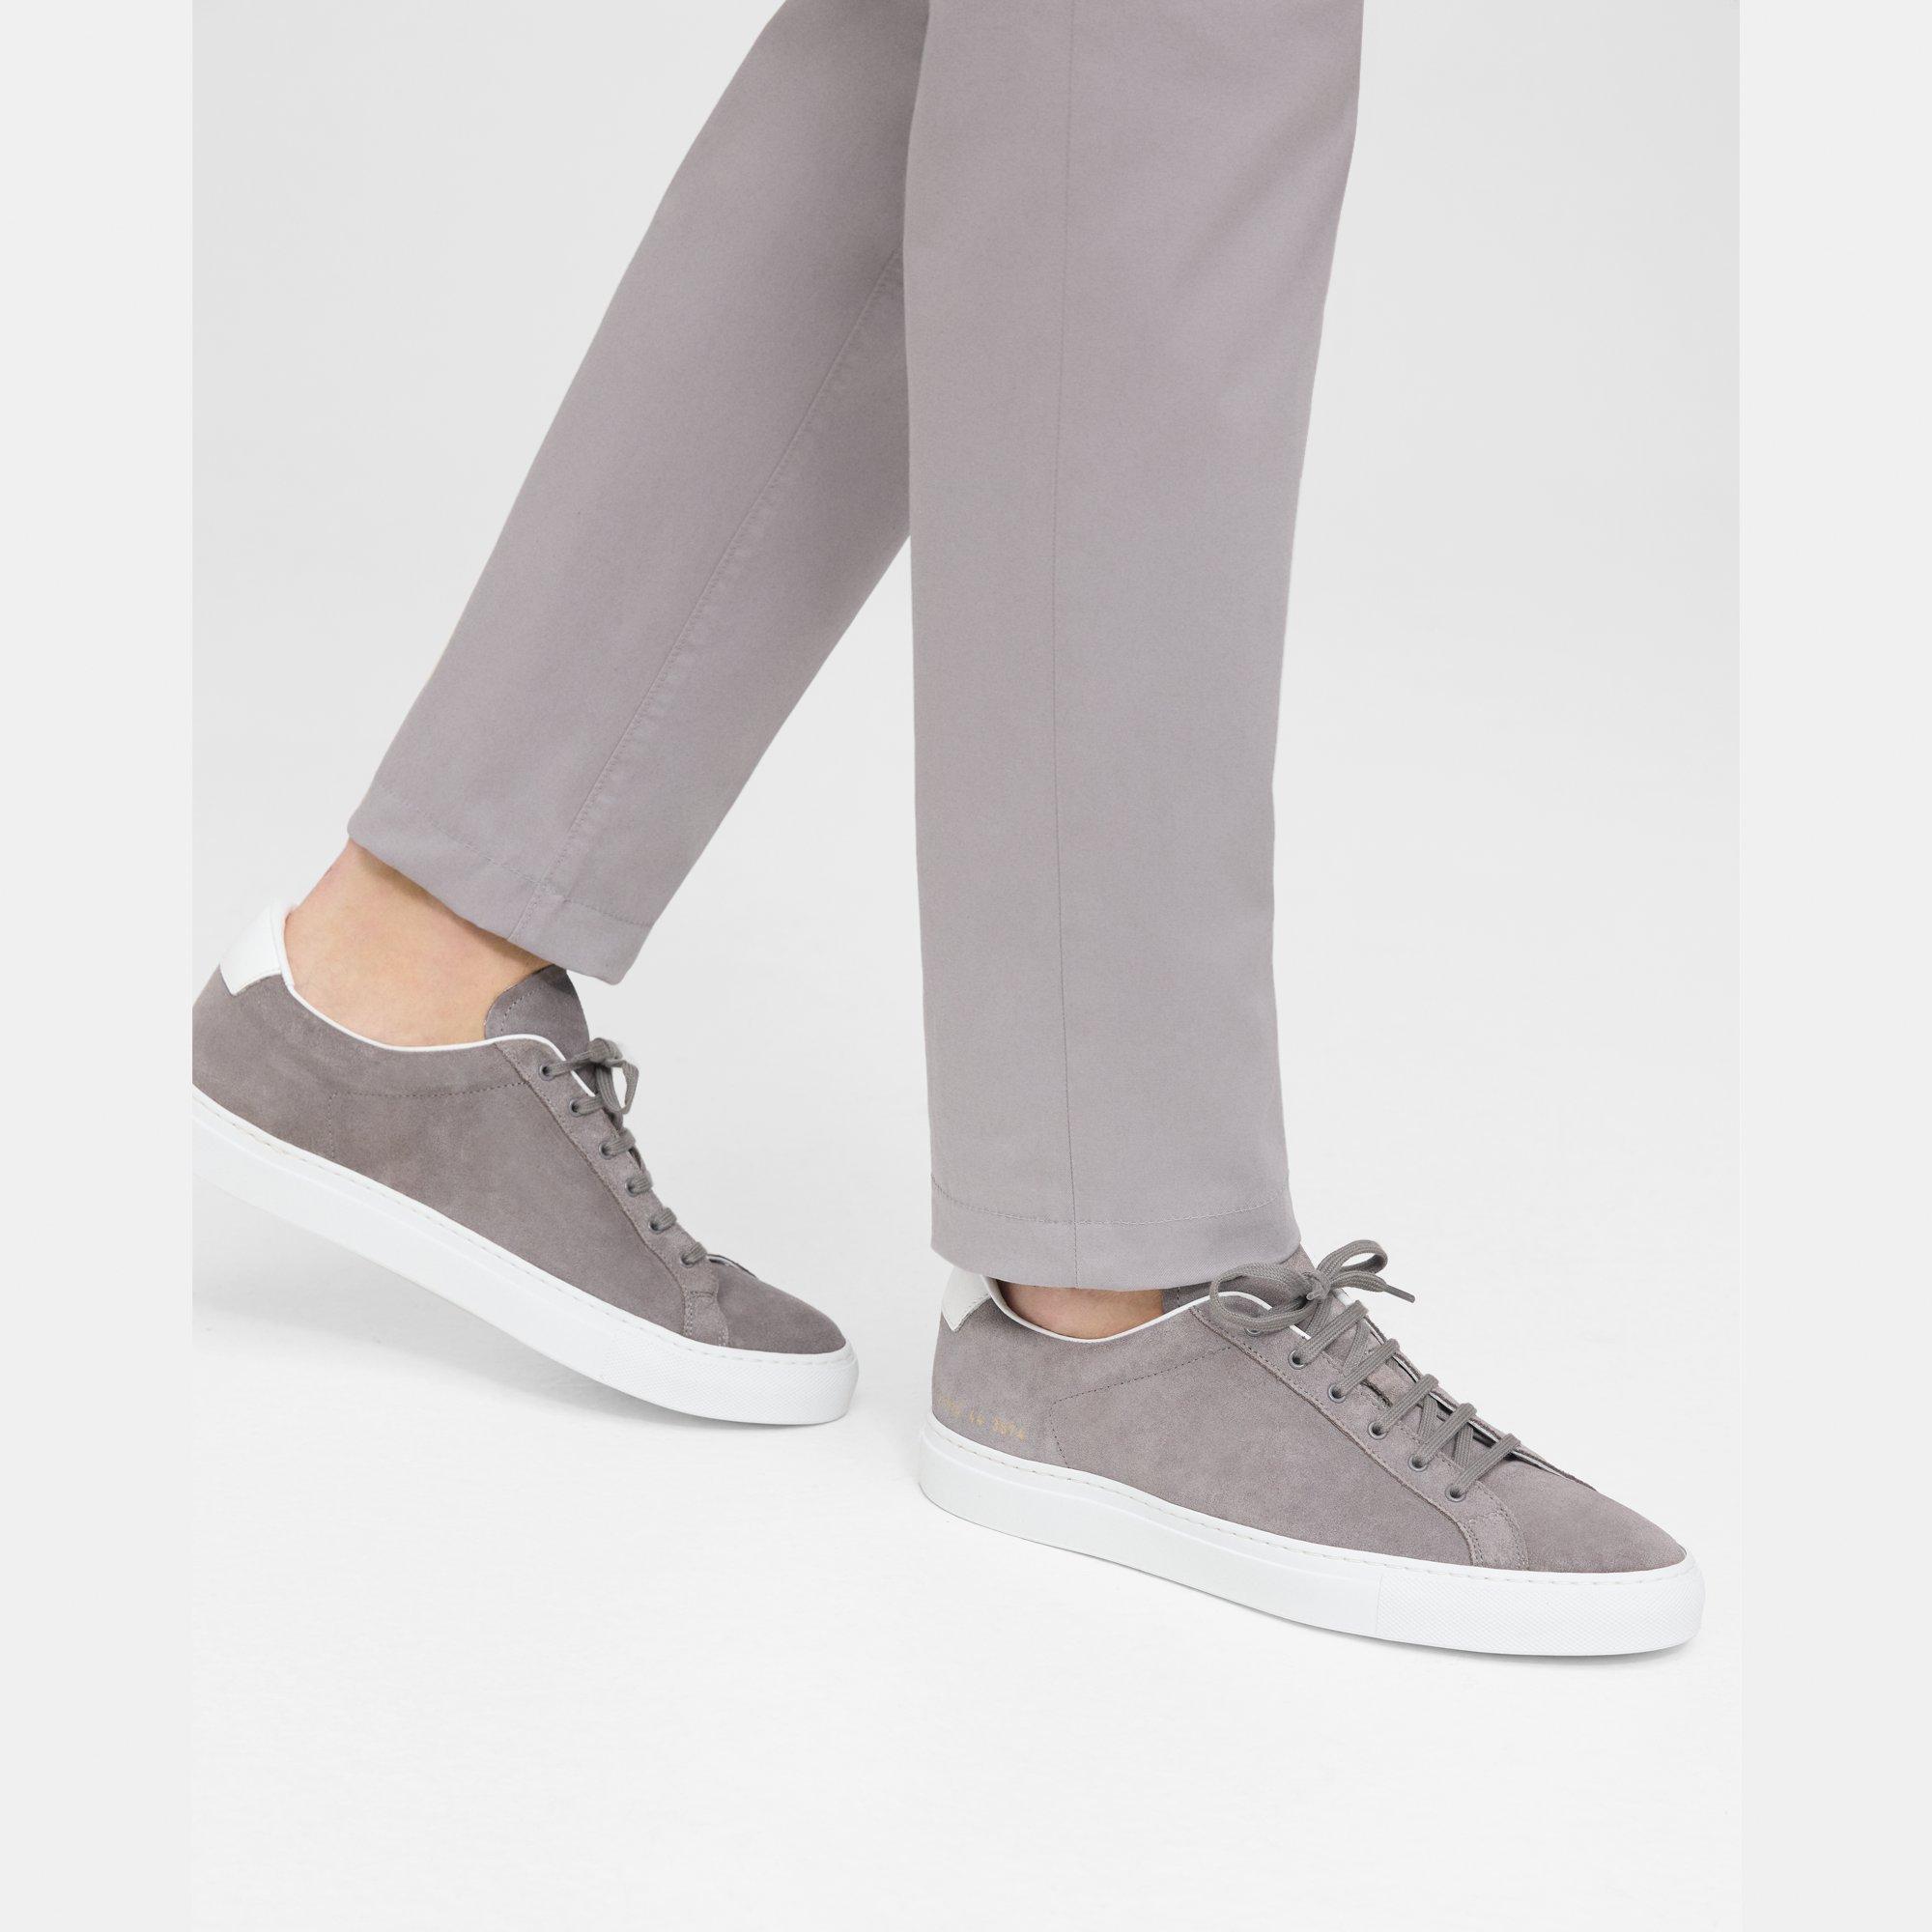 Theory Common Projects Men's Retro Low-top Sneakers In Warm Grey